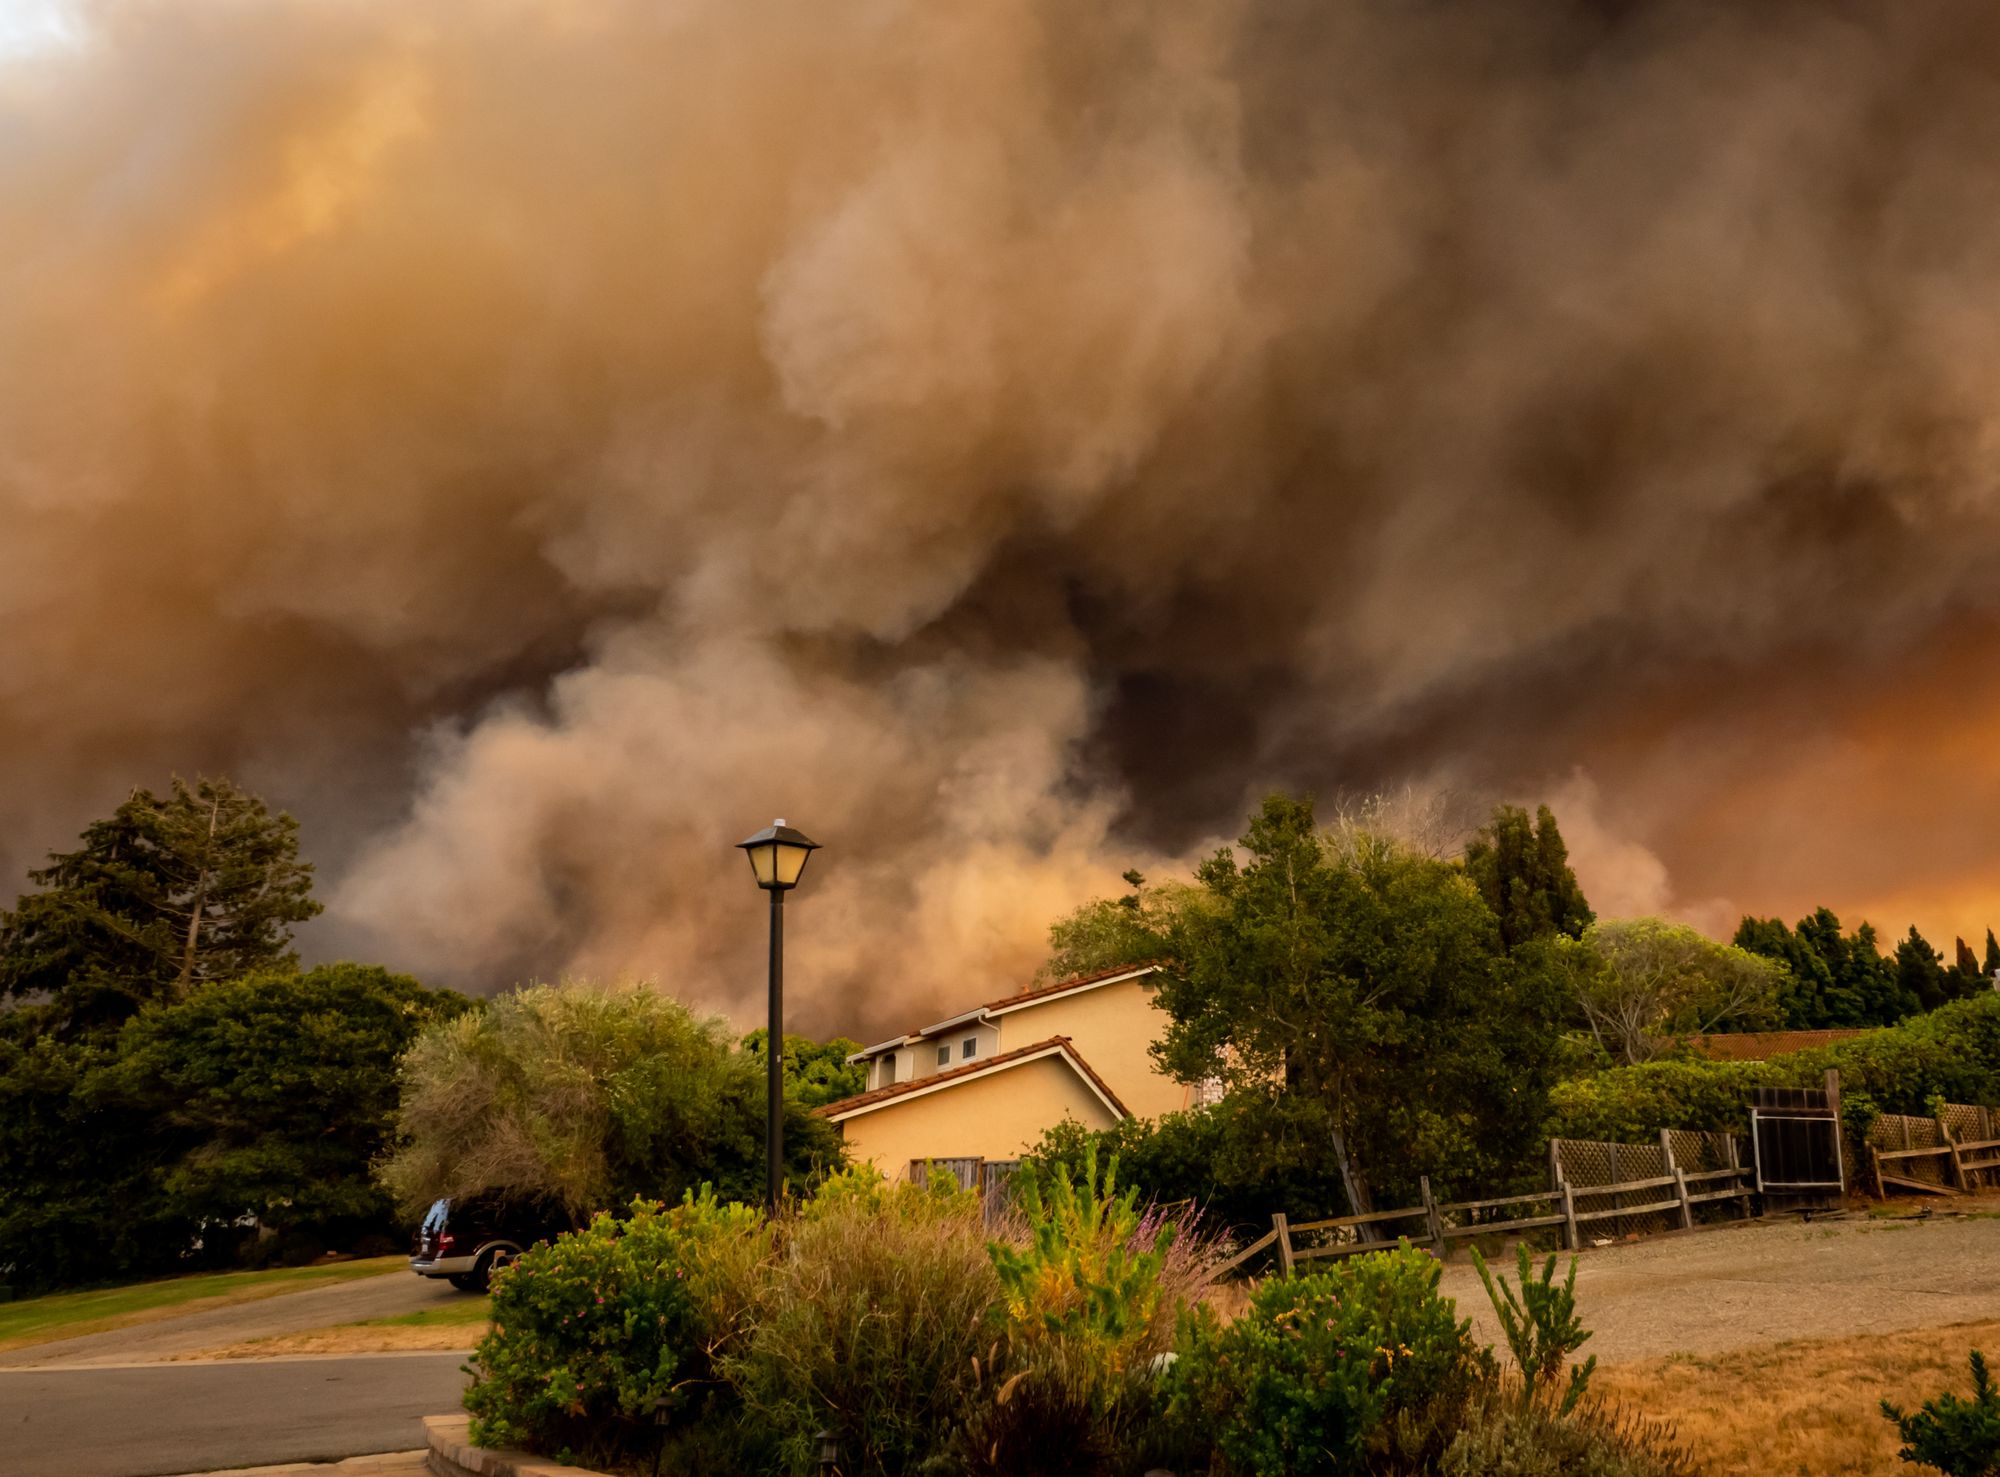 California on Alert for Critical Fire Weather This Week